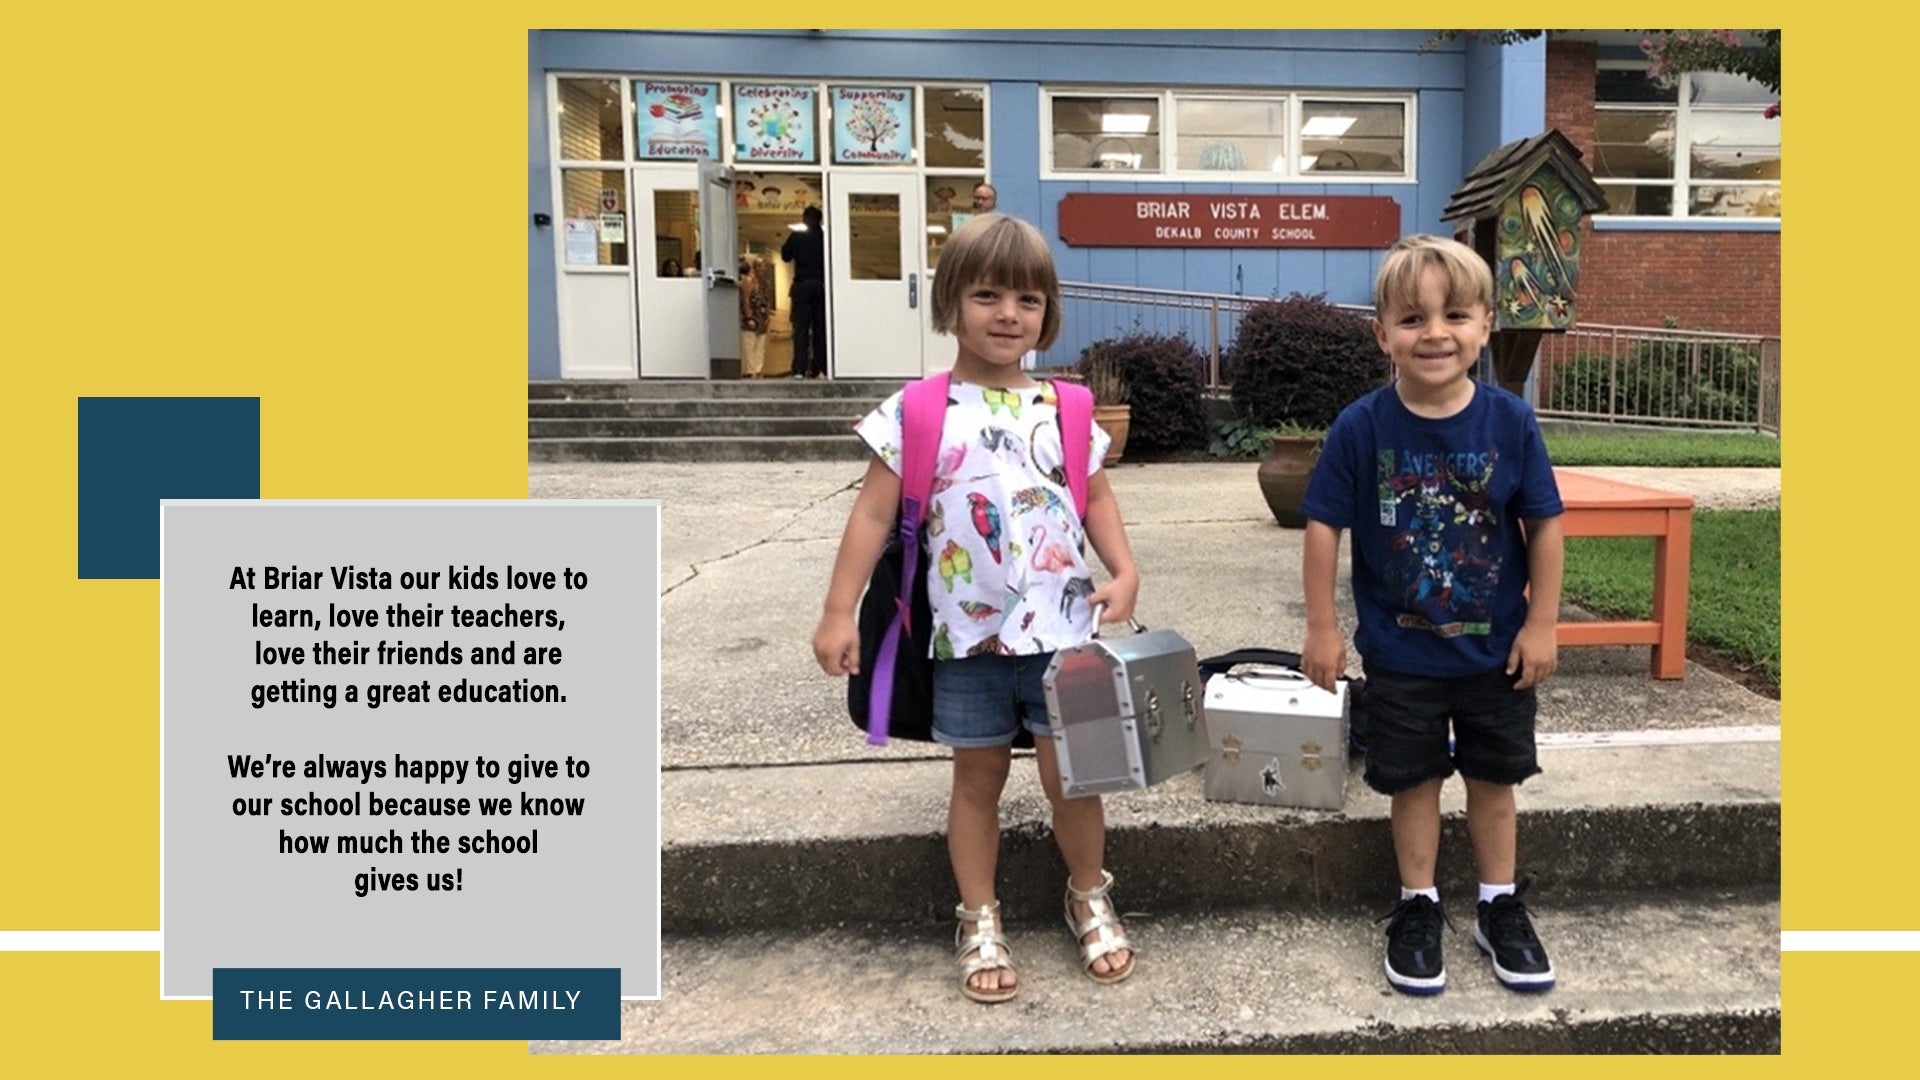 At Briar Vista, our kids love to learn, love their teachers, love their friends and are getting a great education. We're always happy to give to our school because we know how much the school gives us! - The Gallagher Family